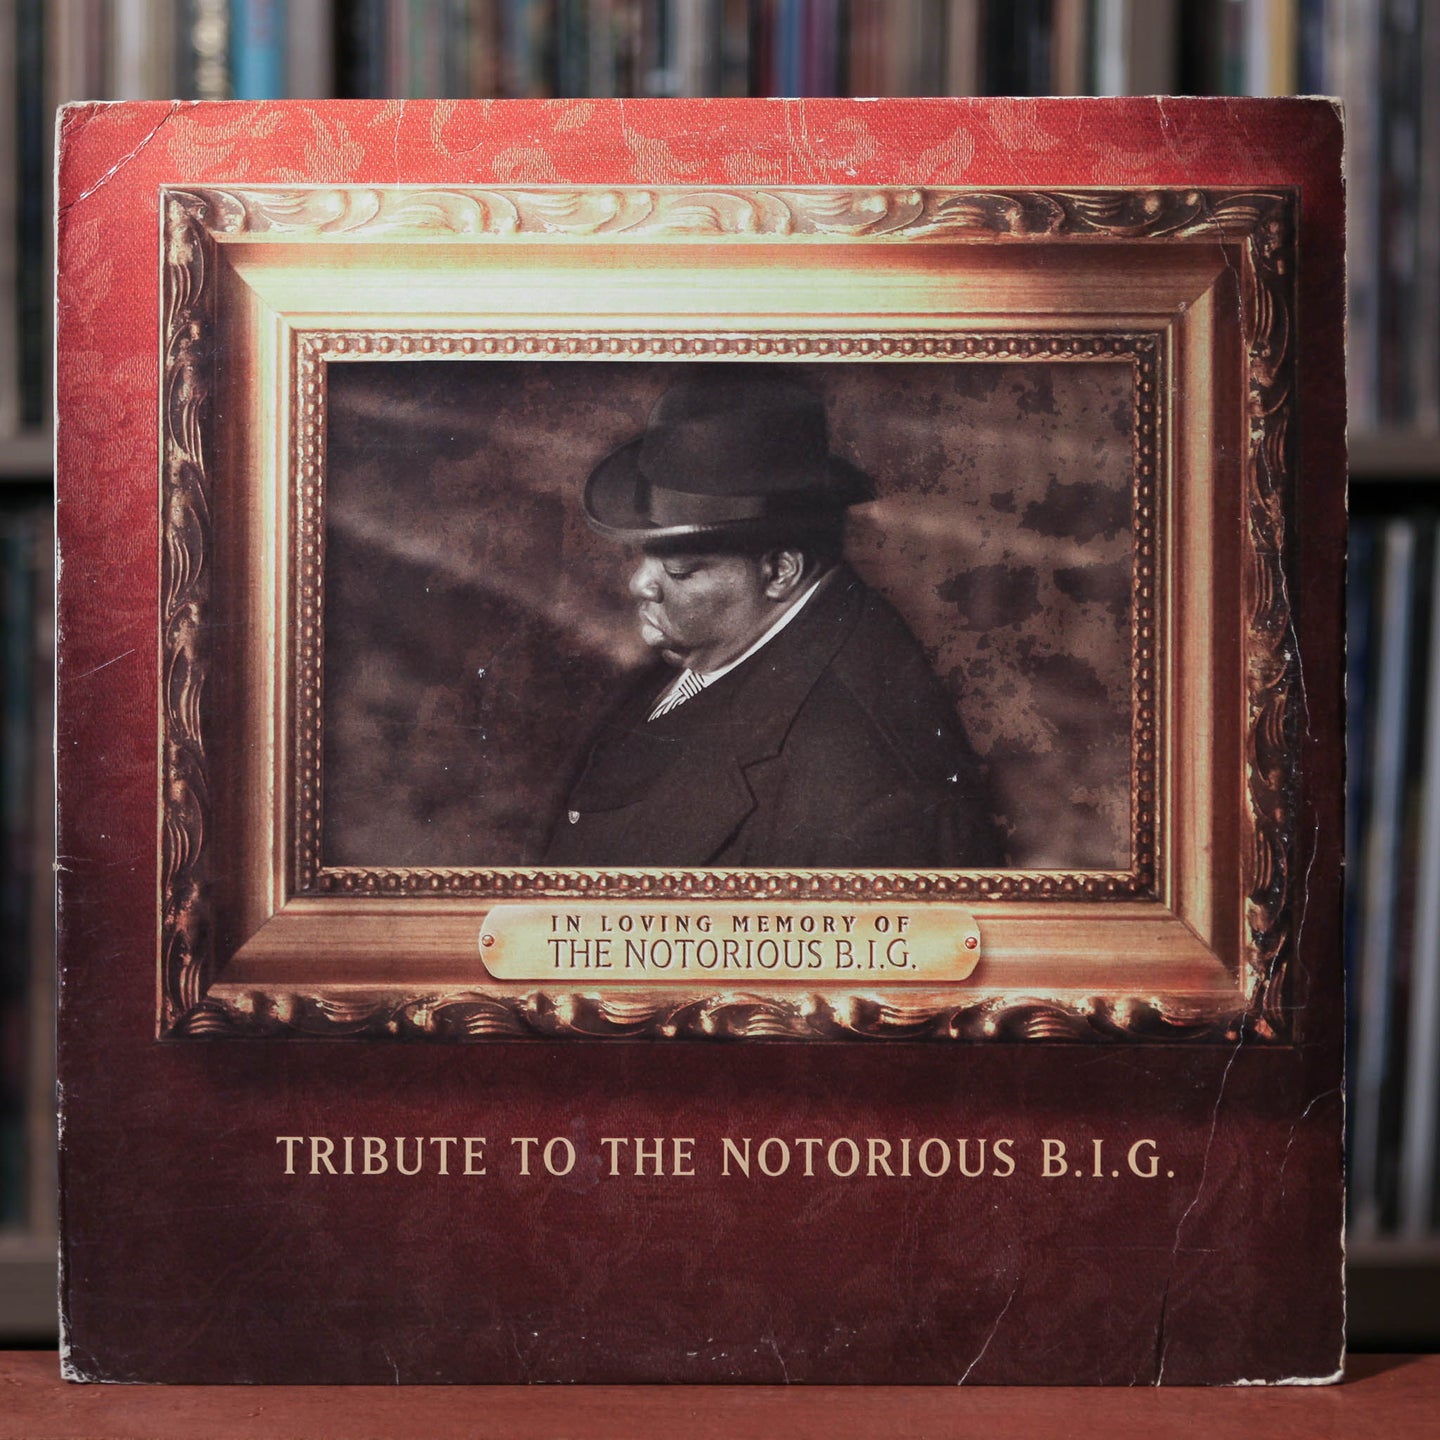 Puff Daddy & Faith Evans / 112 / The Lox - Tribute To The Notorious B.I.G. - 12